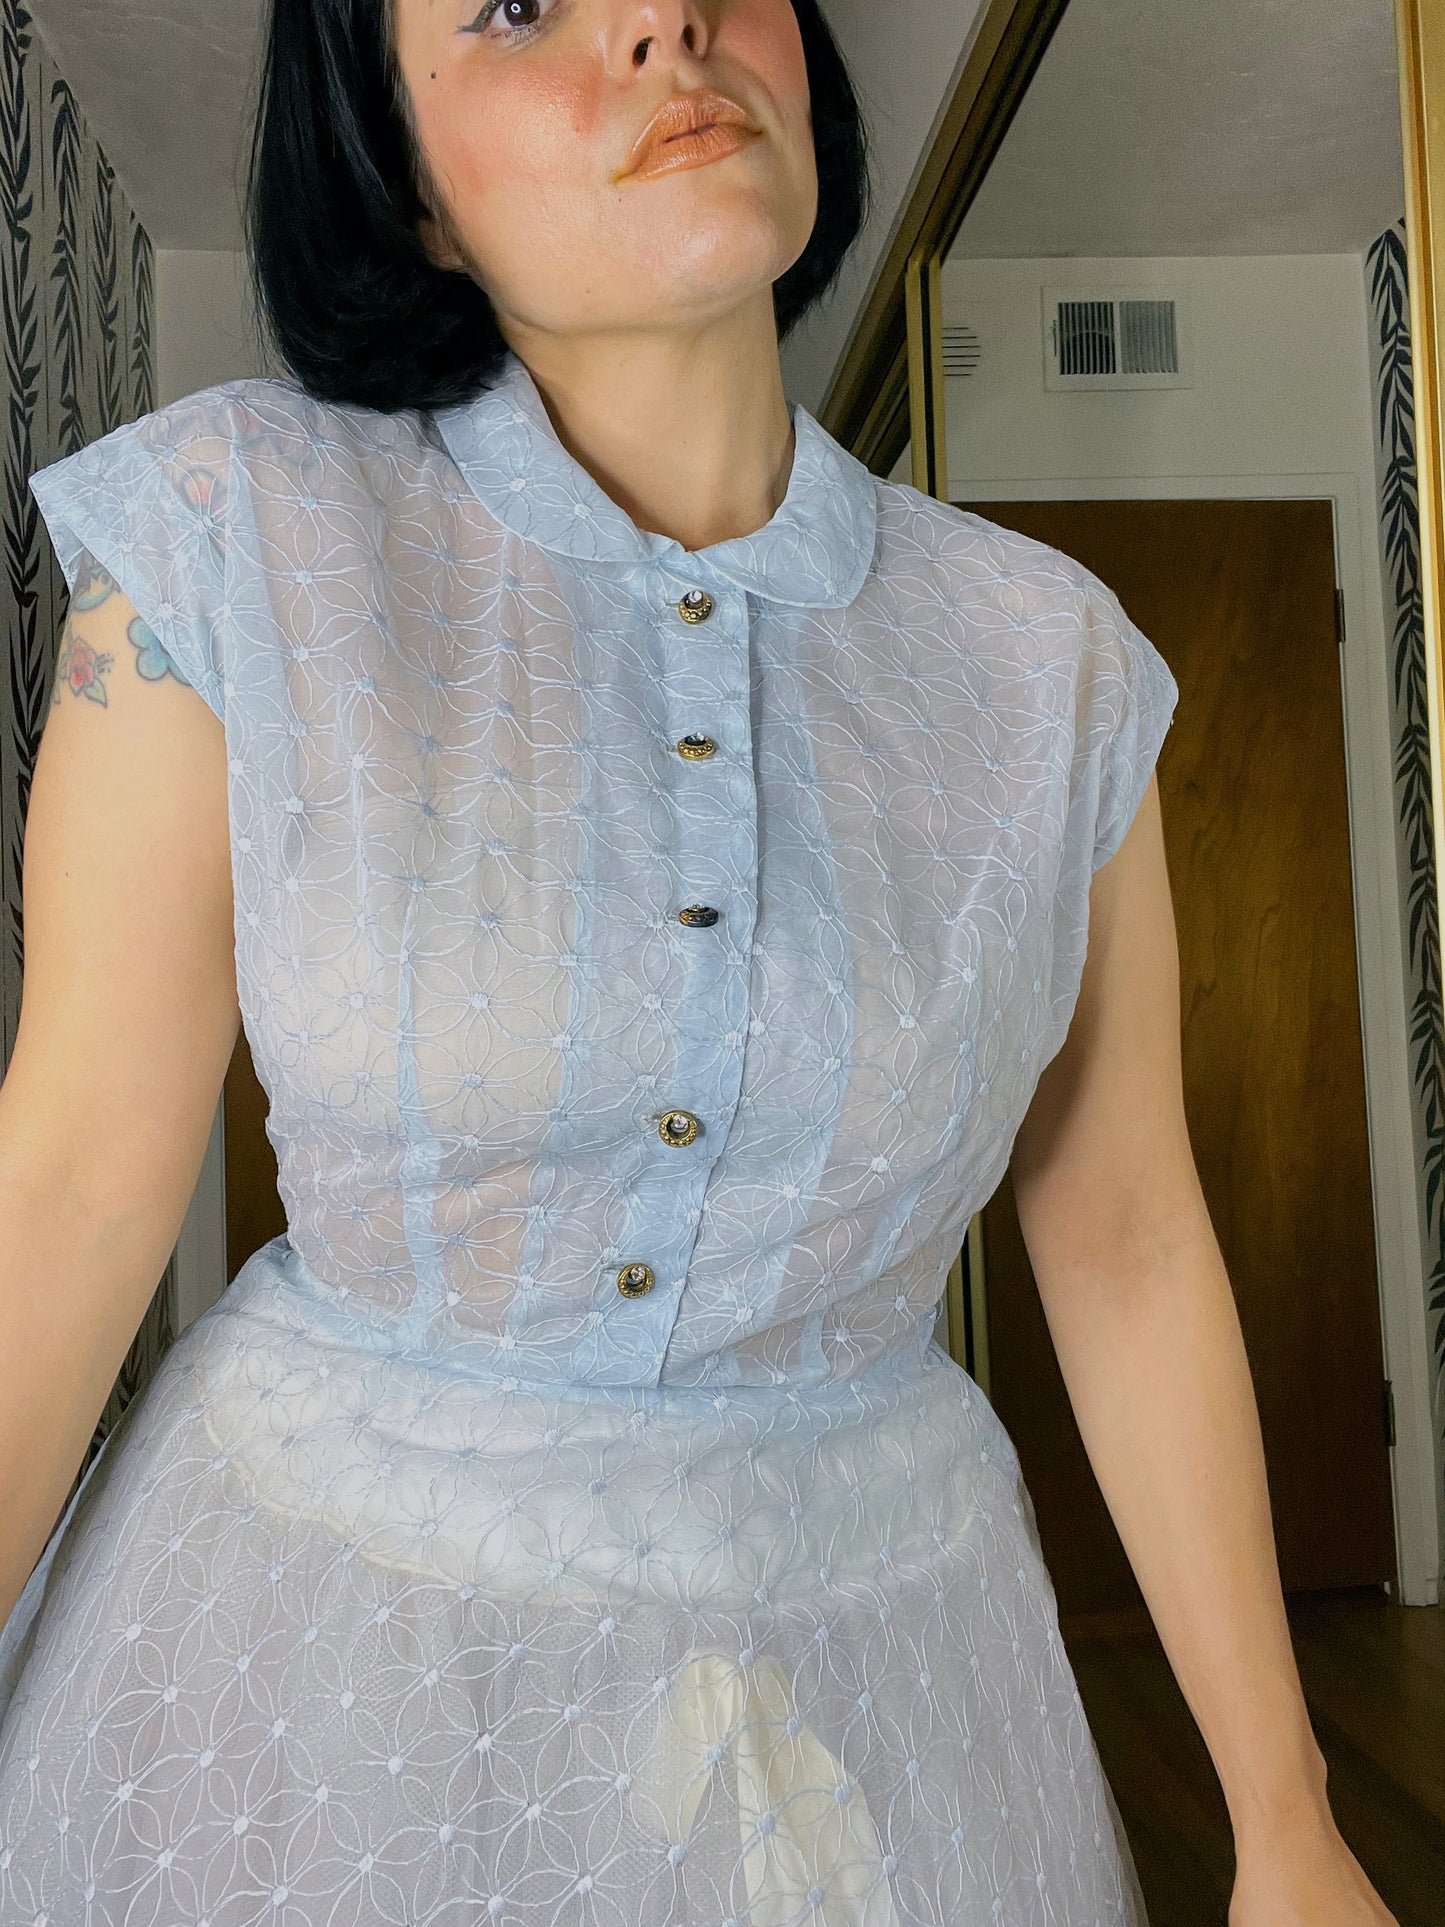 Vintage 50s / 60s Powder Blue Sheer Round Collar Button Down Embroidered Floral Design Midi Dress Fits Sizes S-M